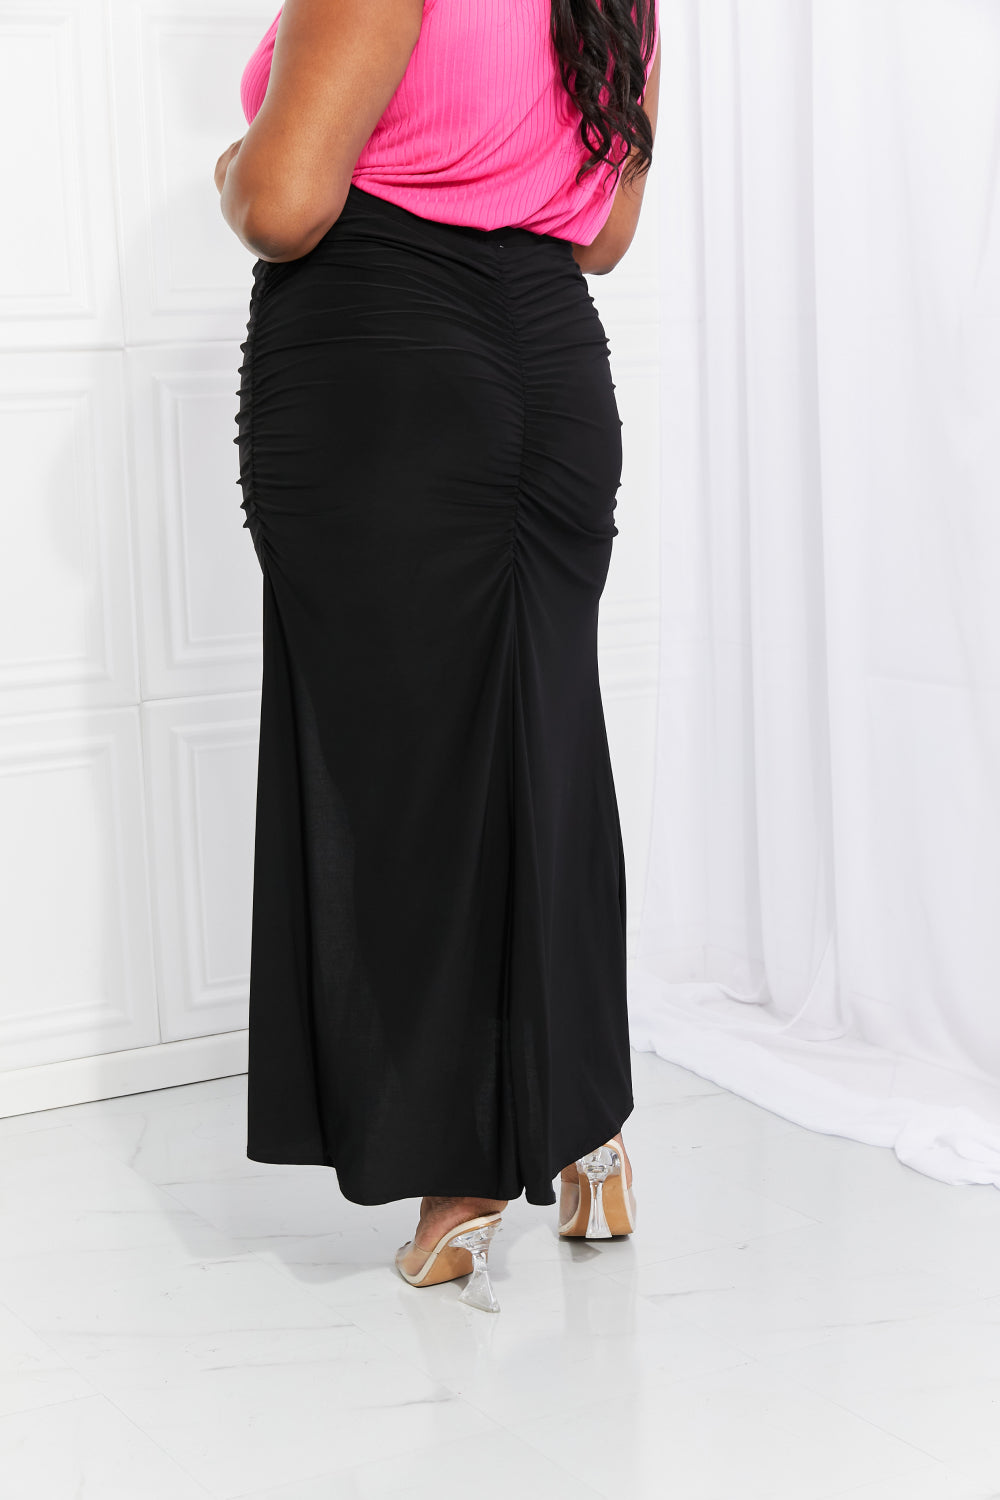 White Birch Full Size Up and Up Ruched Slit Maxi Skirt in Black COCO CRESS